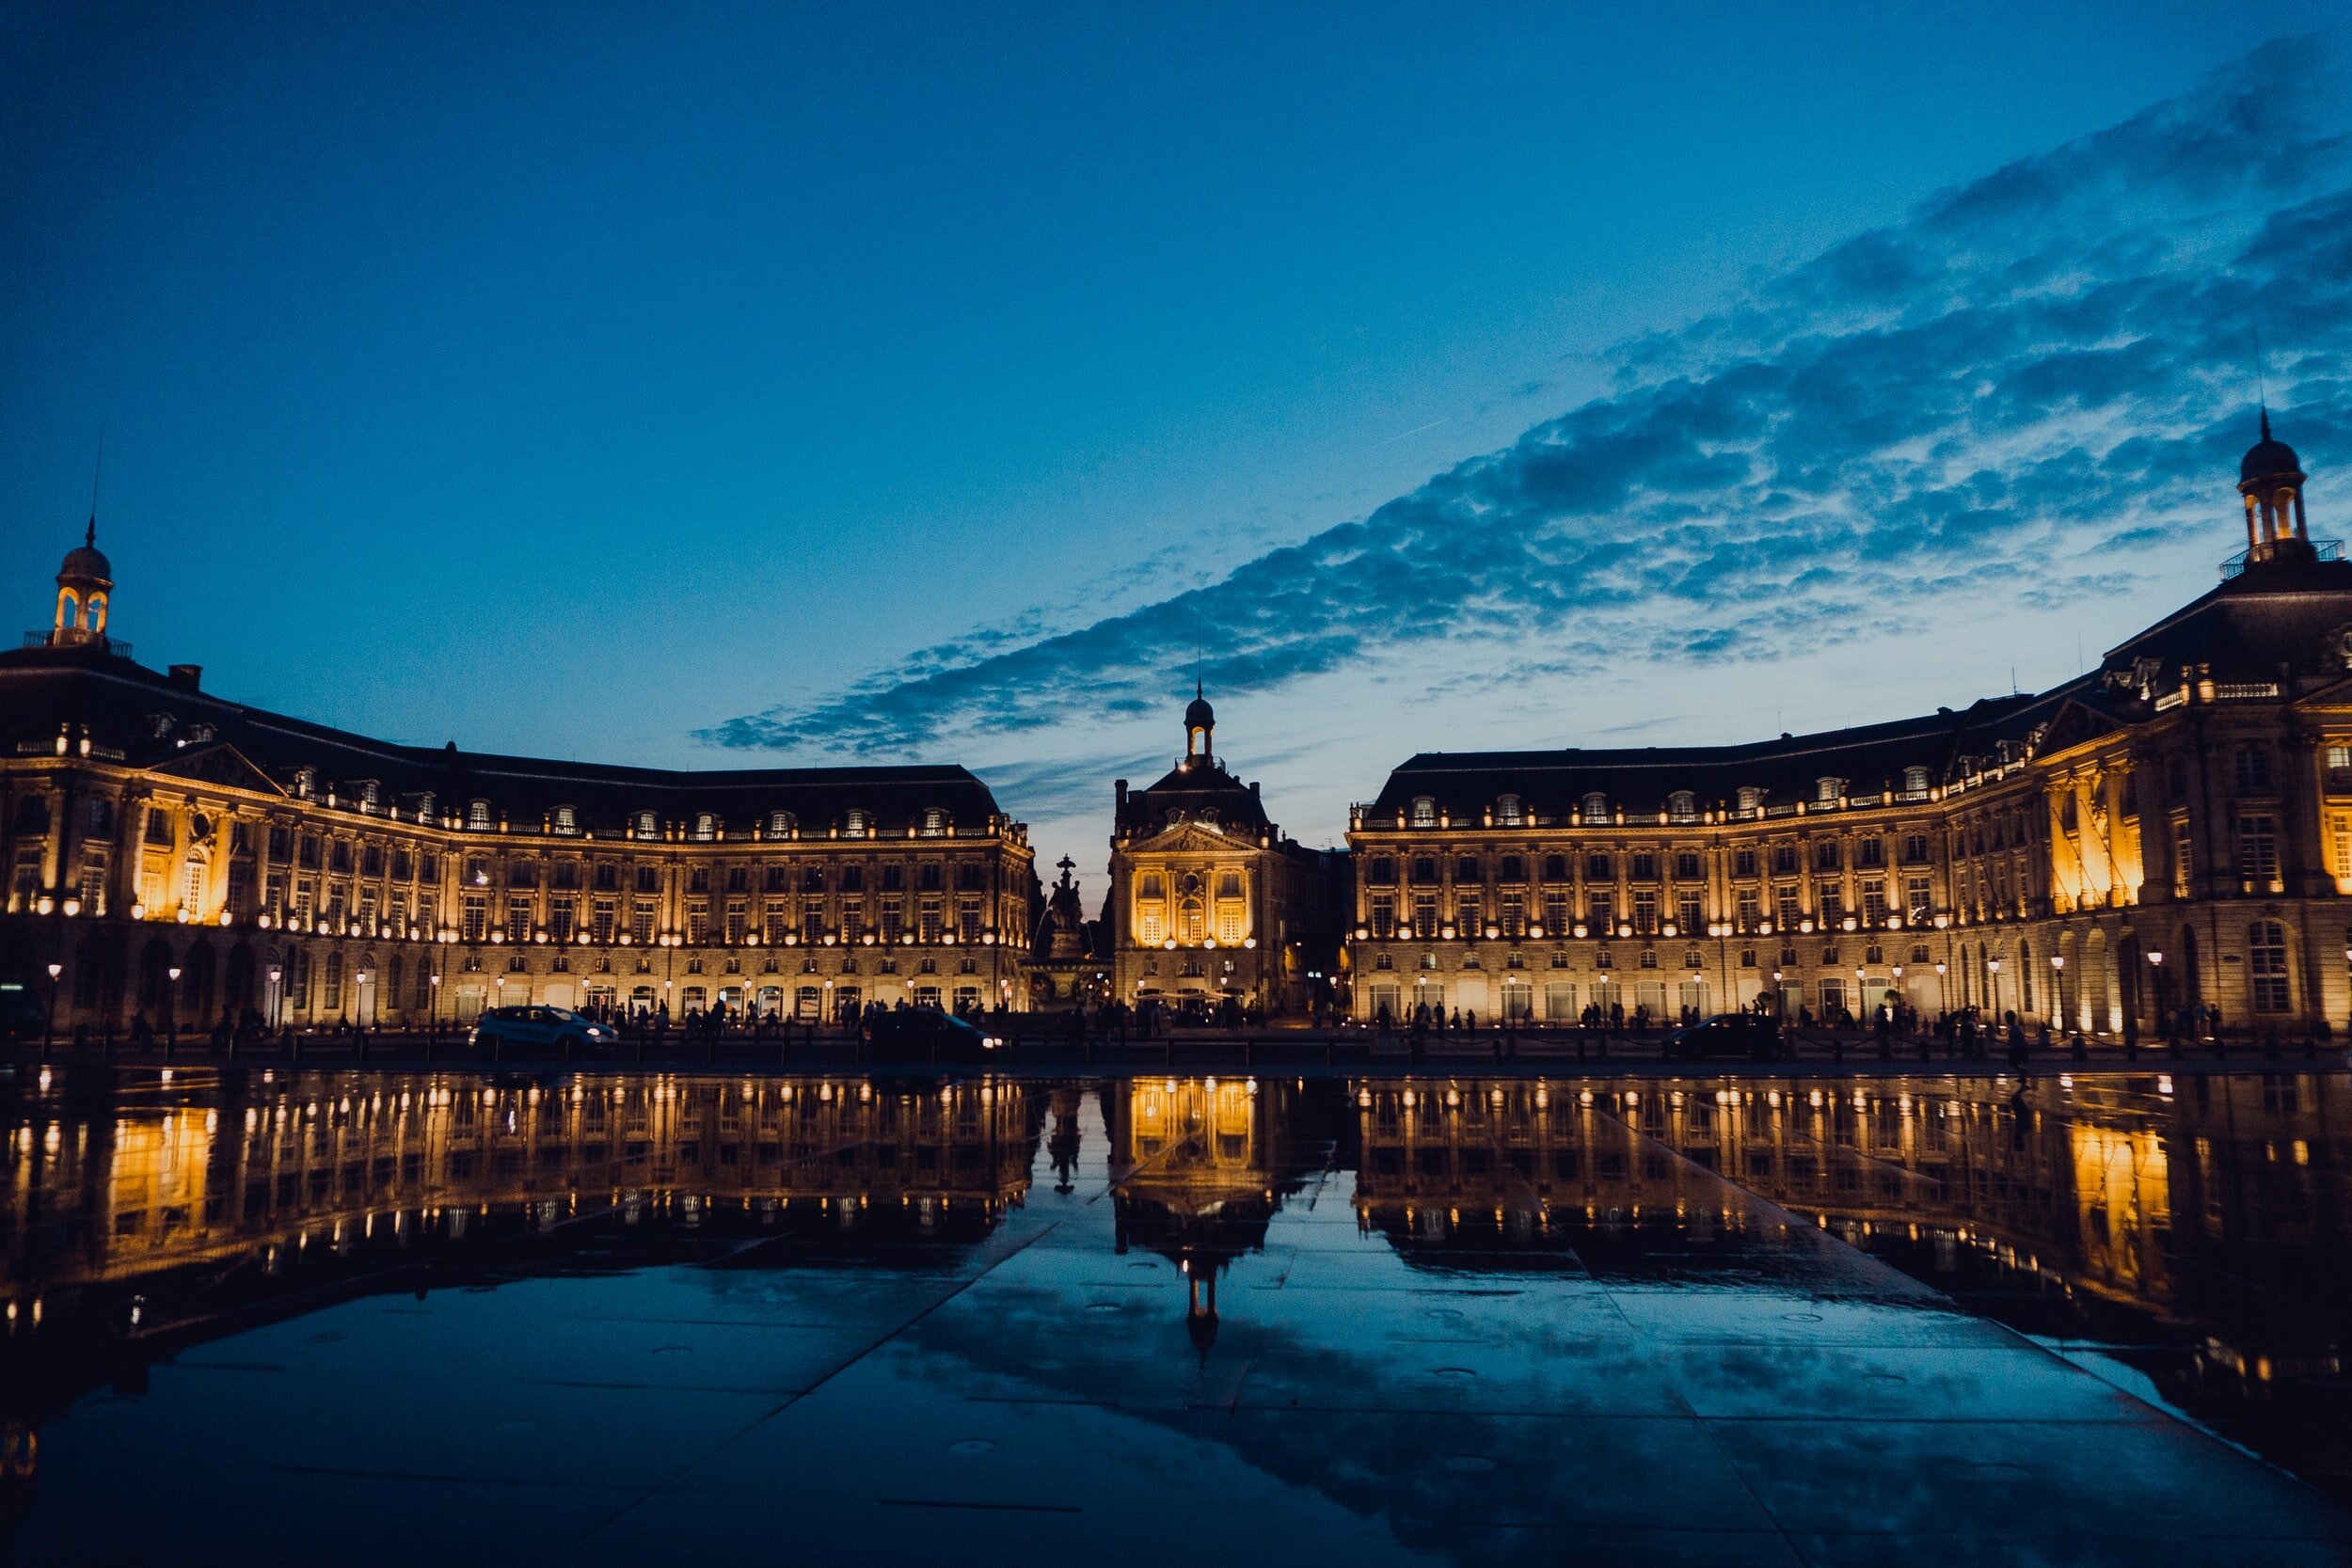 Discover the city of Bordeaux in southwest France